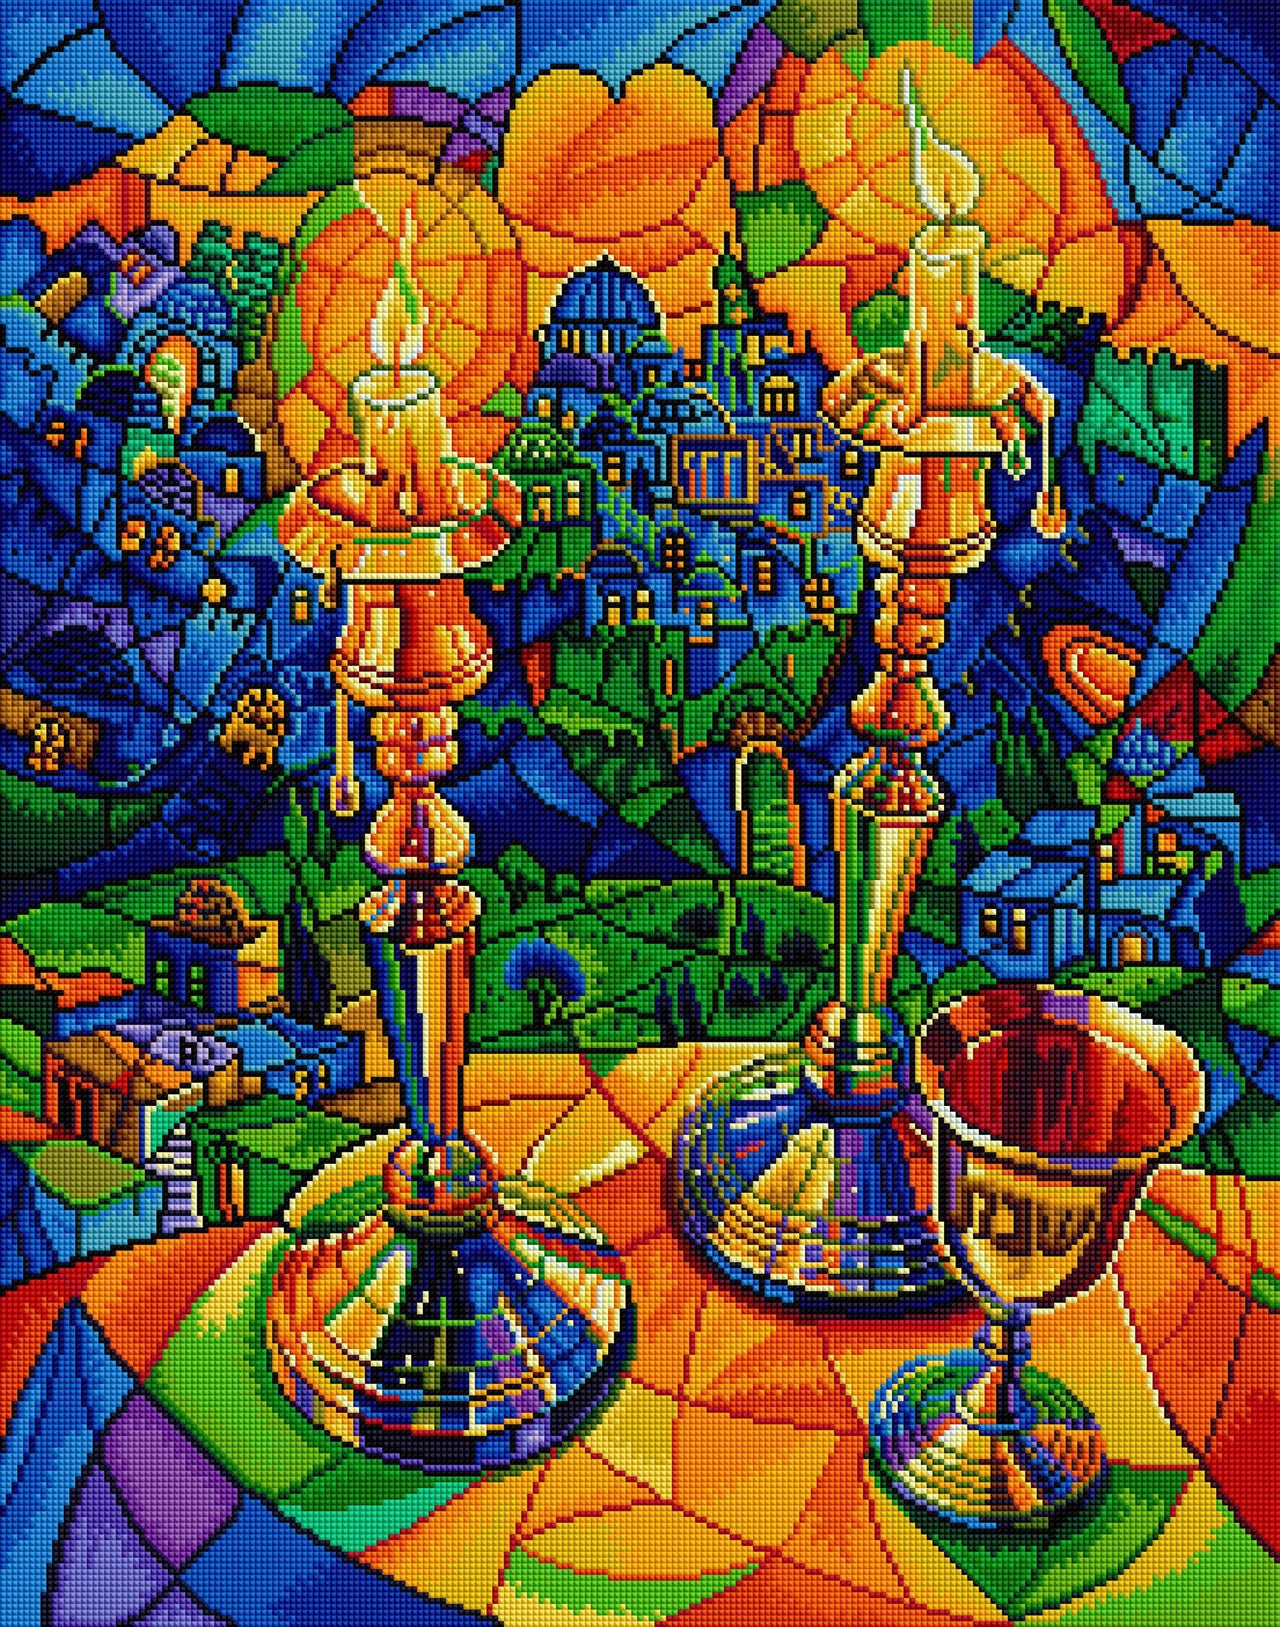 Diamond Painting Sabbath in Jerusalem 22" x 28" (56cm x 71cm) / Square With 43 Colors Including 3 ABs / 62,101